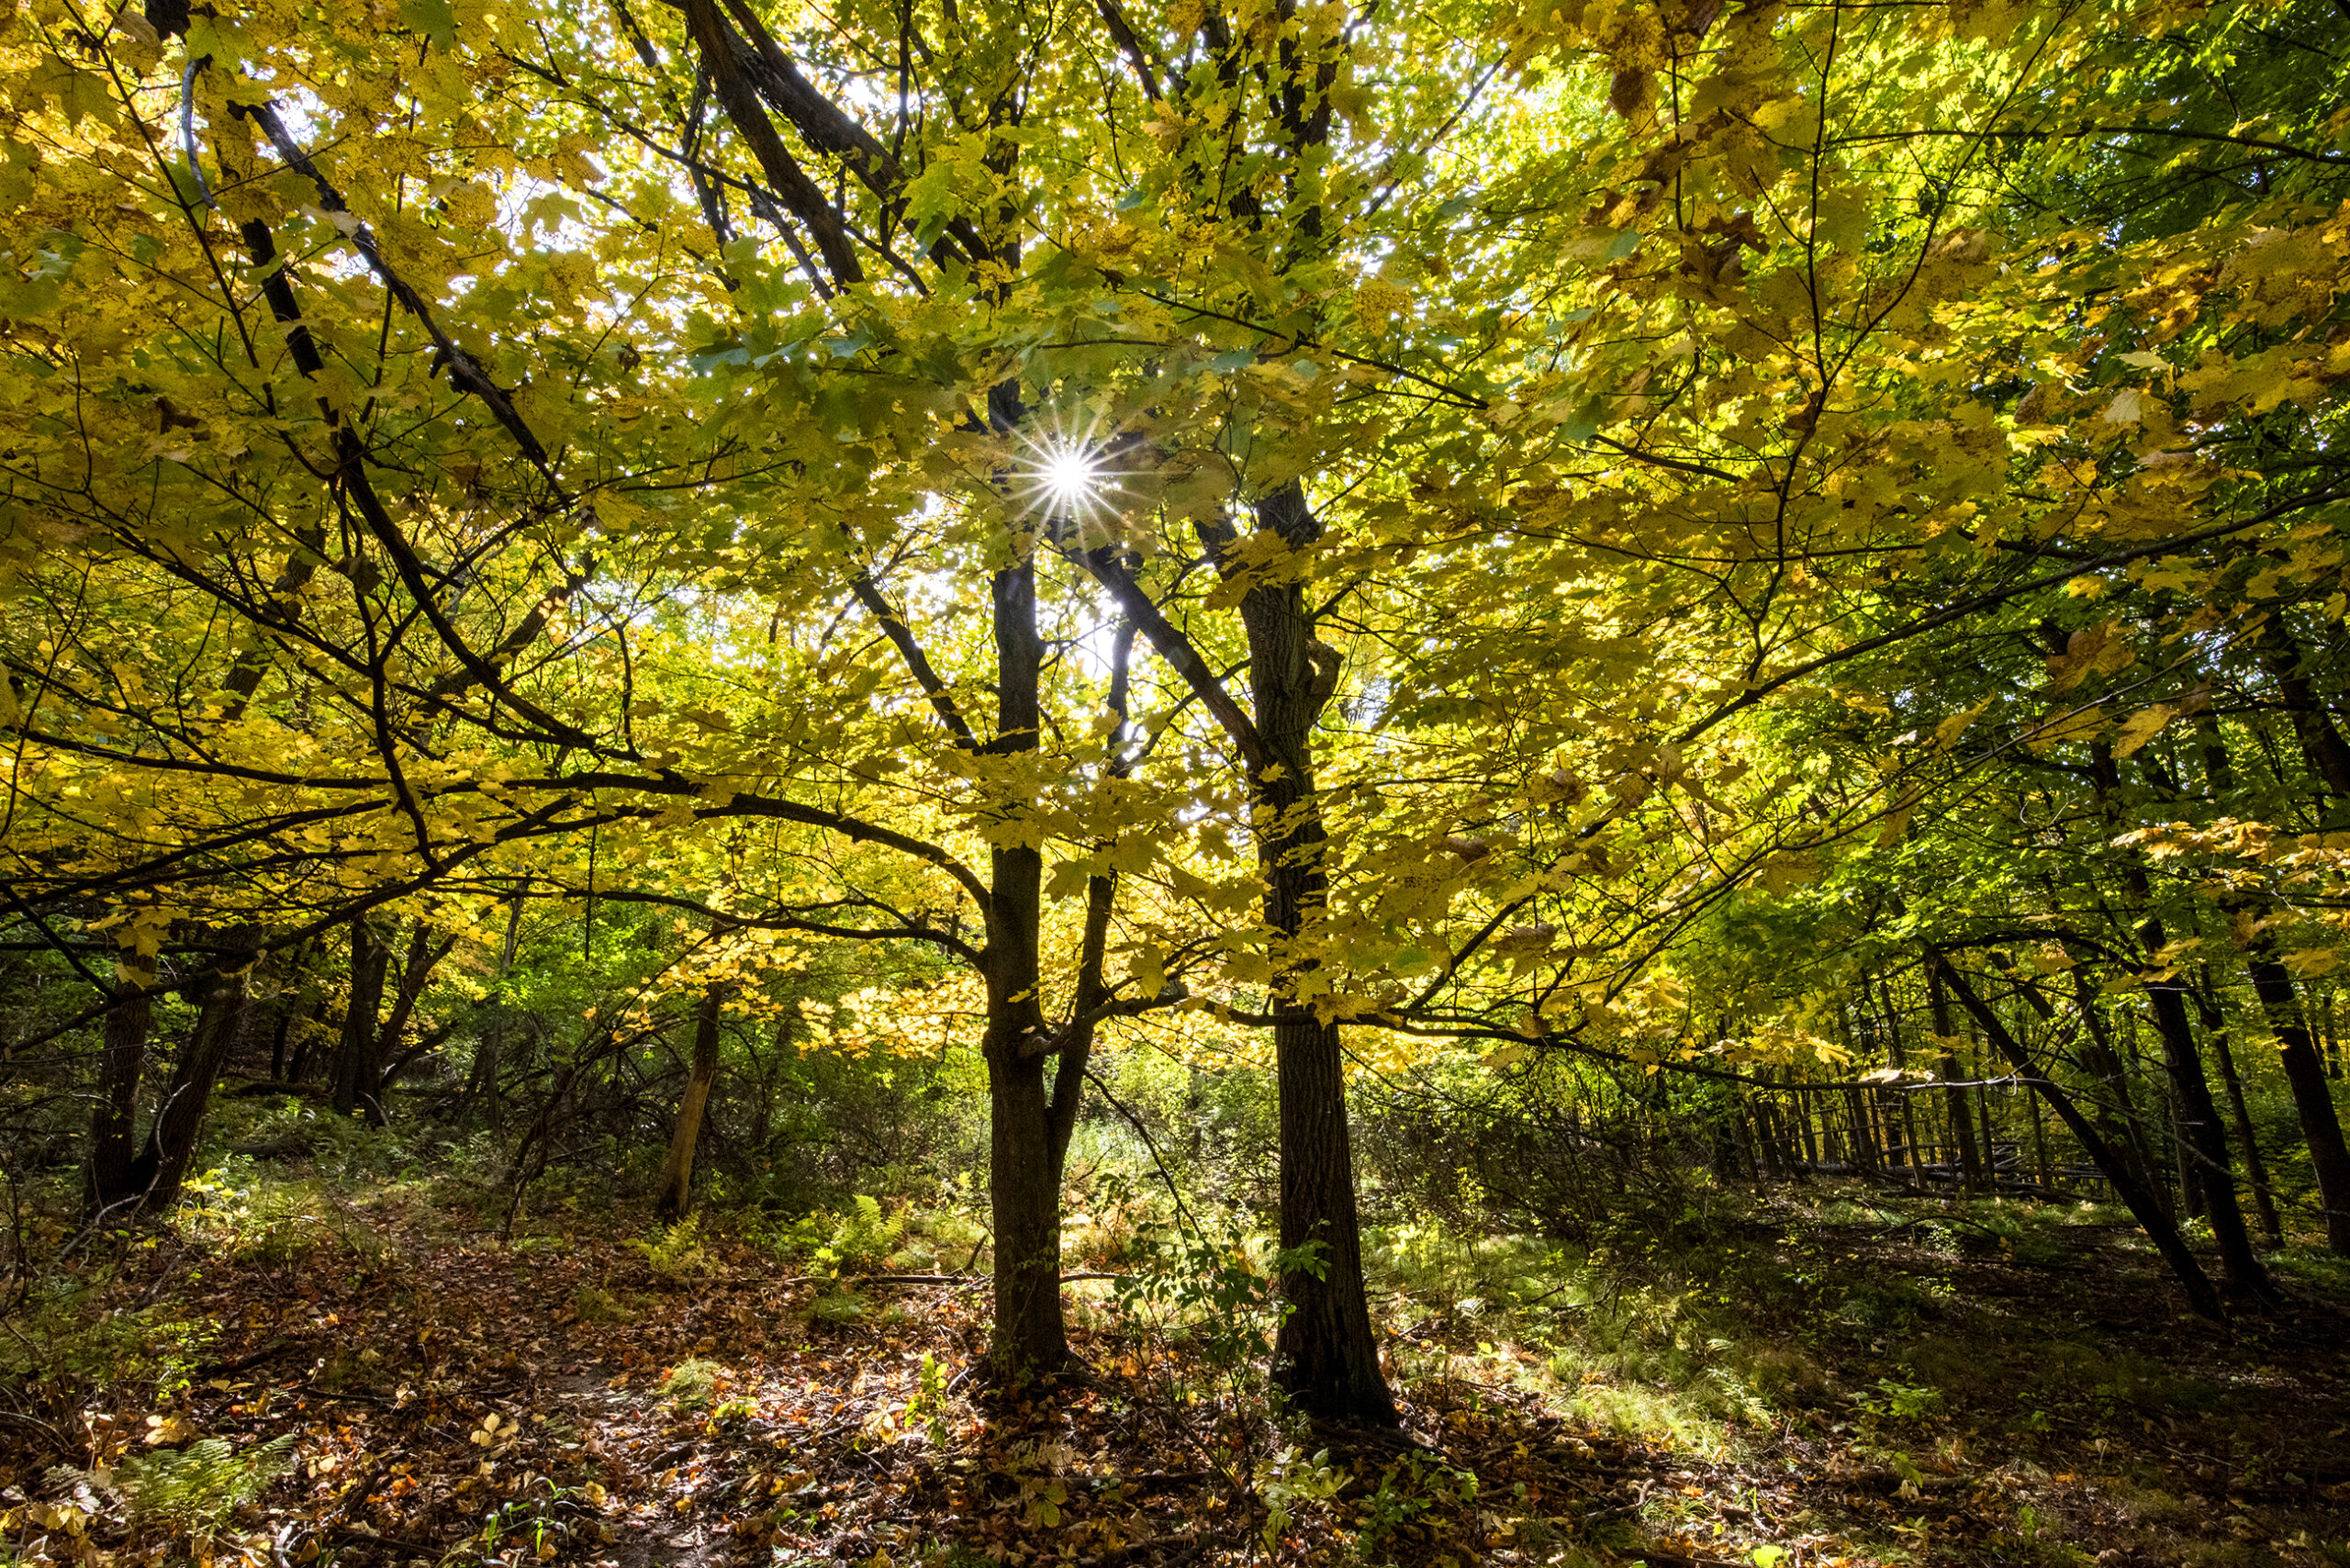 Two trees with yellow leaves are seen in a forested area. The sun shines through the leaves.